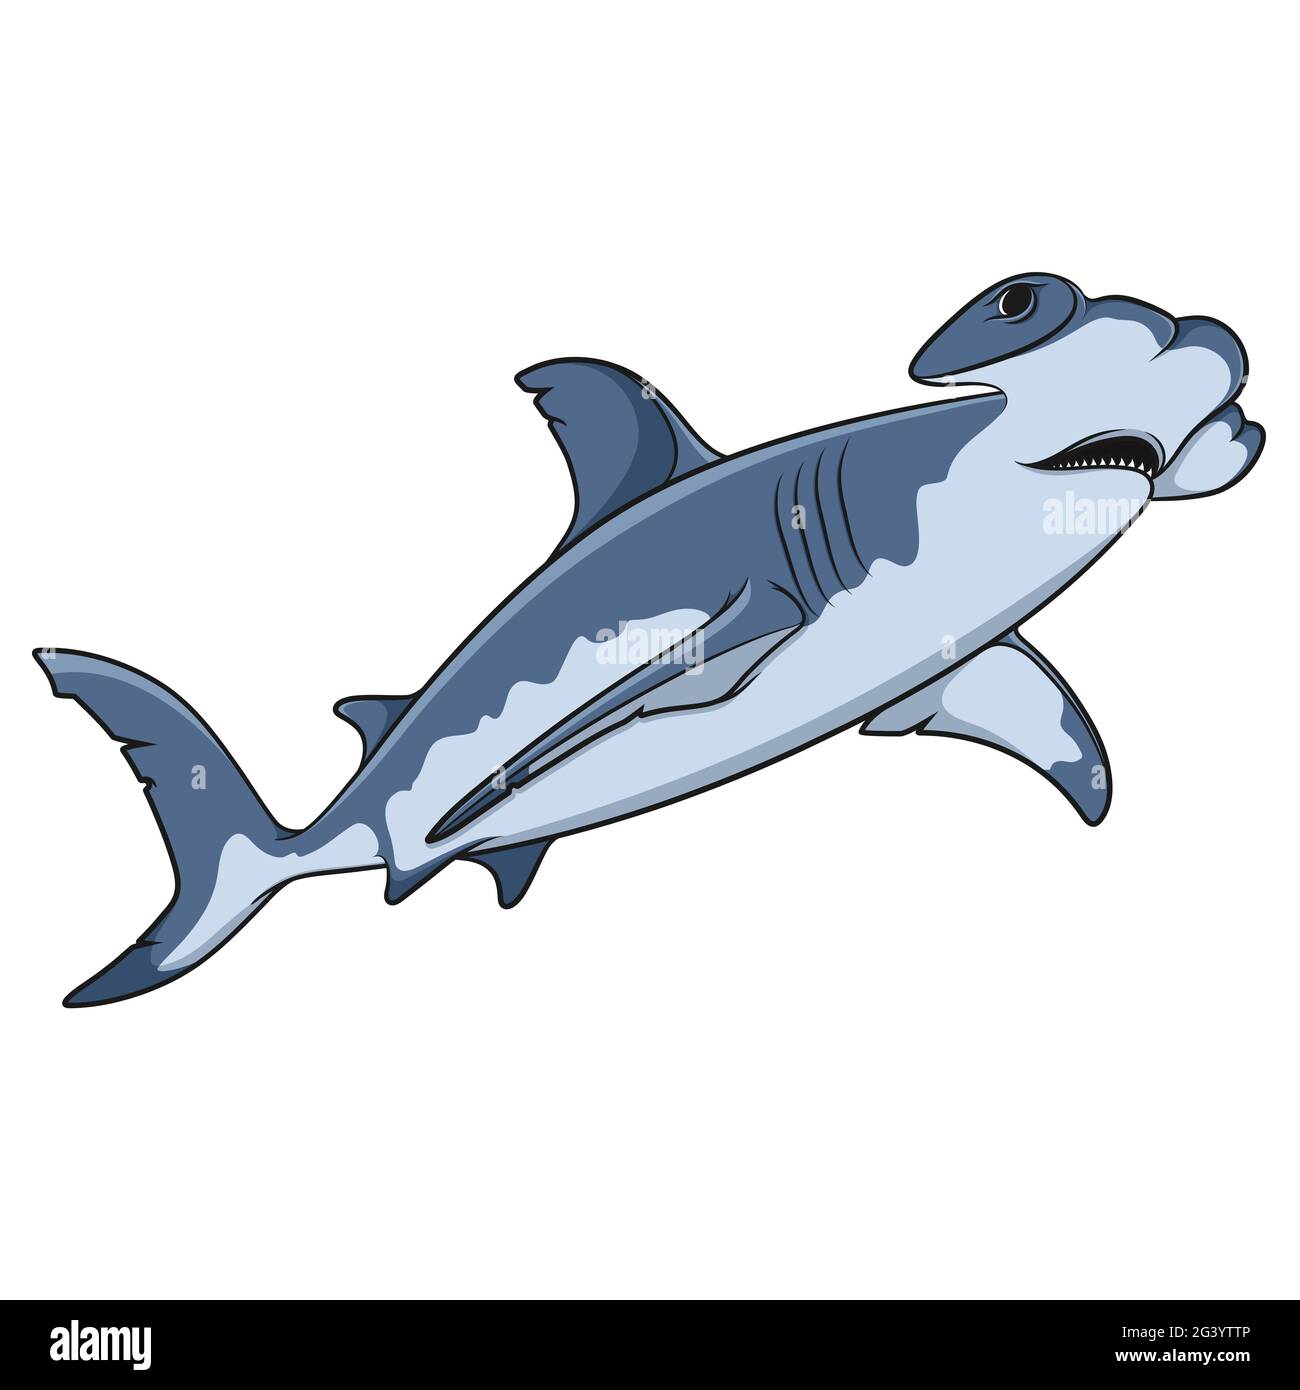 Vector color illustration of the hammerhead shark. Isolated object on a white background. Stock Vector